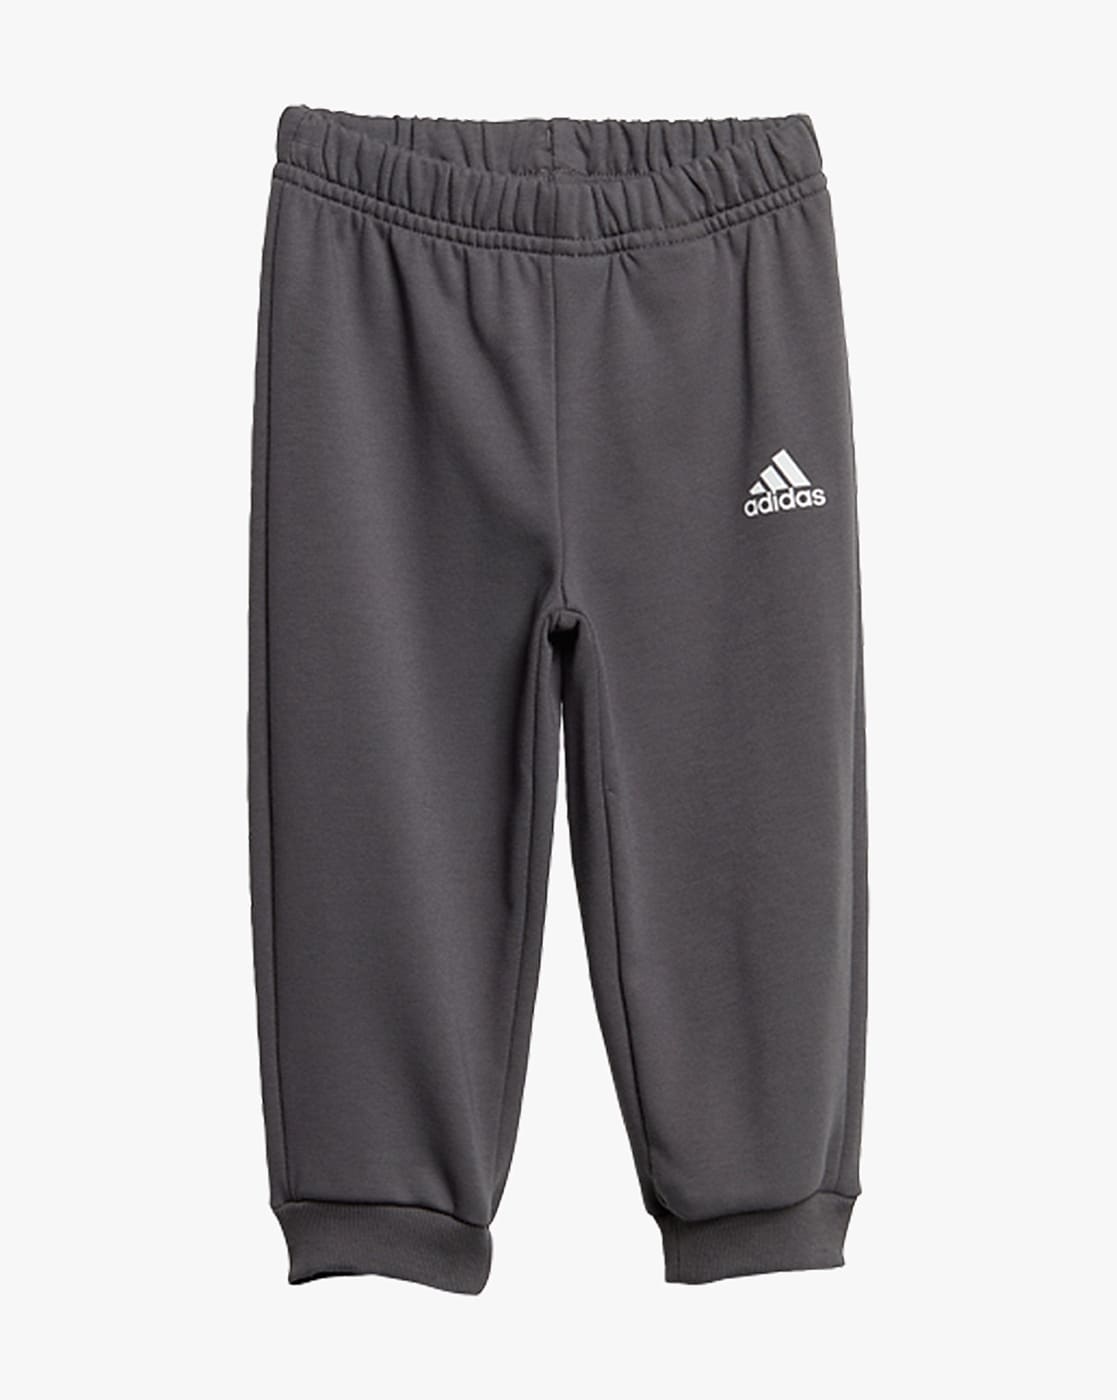 Buy Grey Sets for Boys by Adidas Kids Online